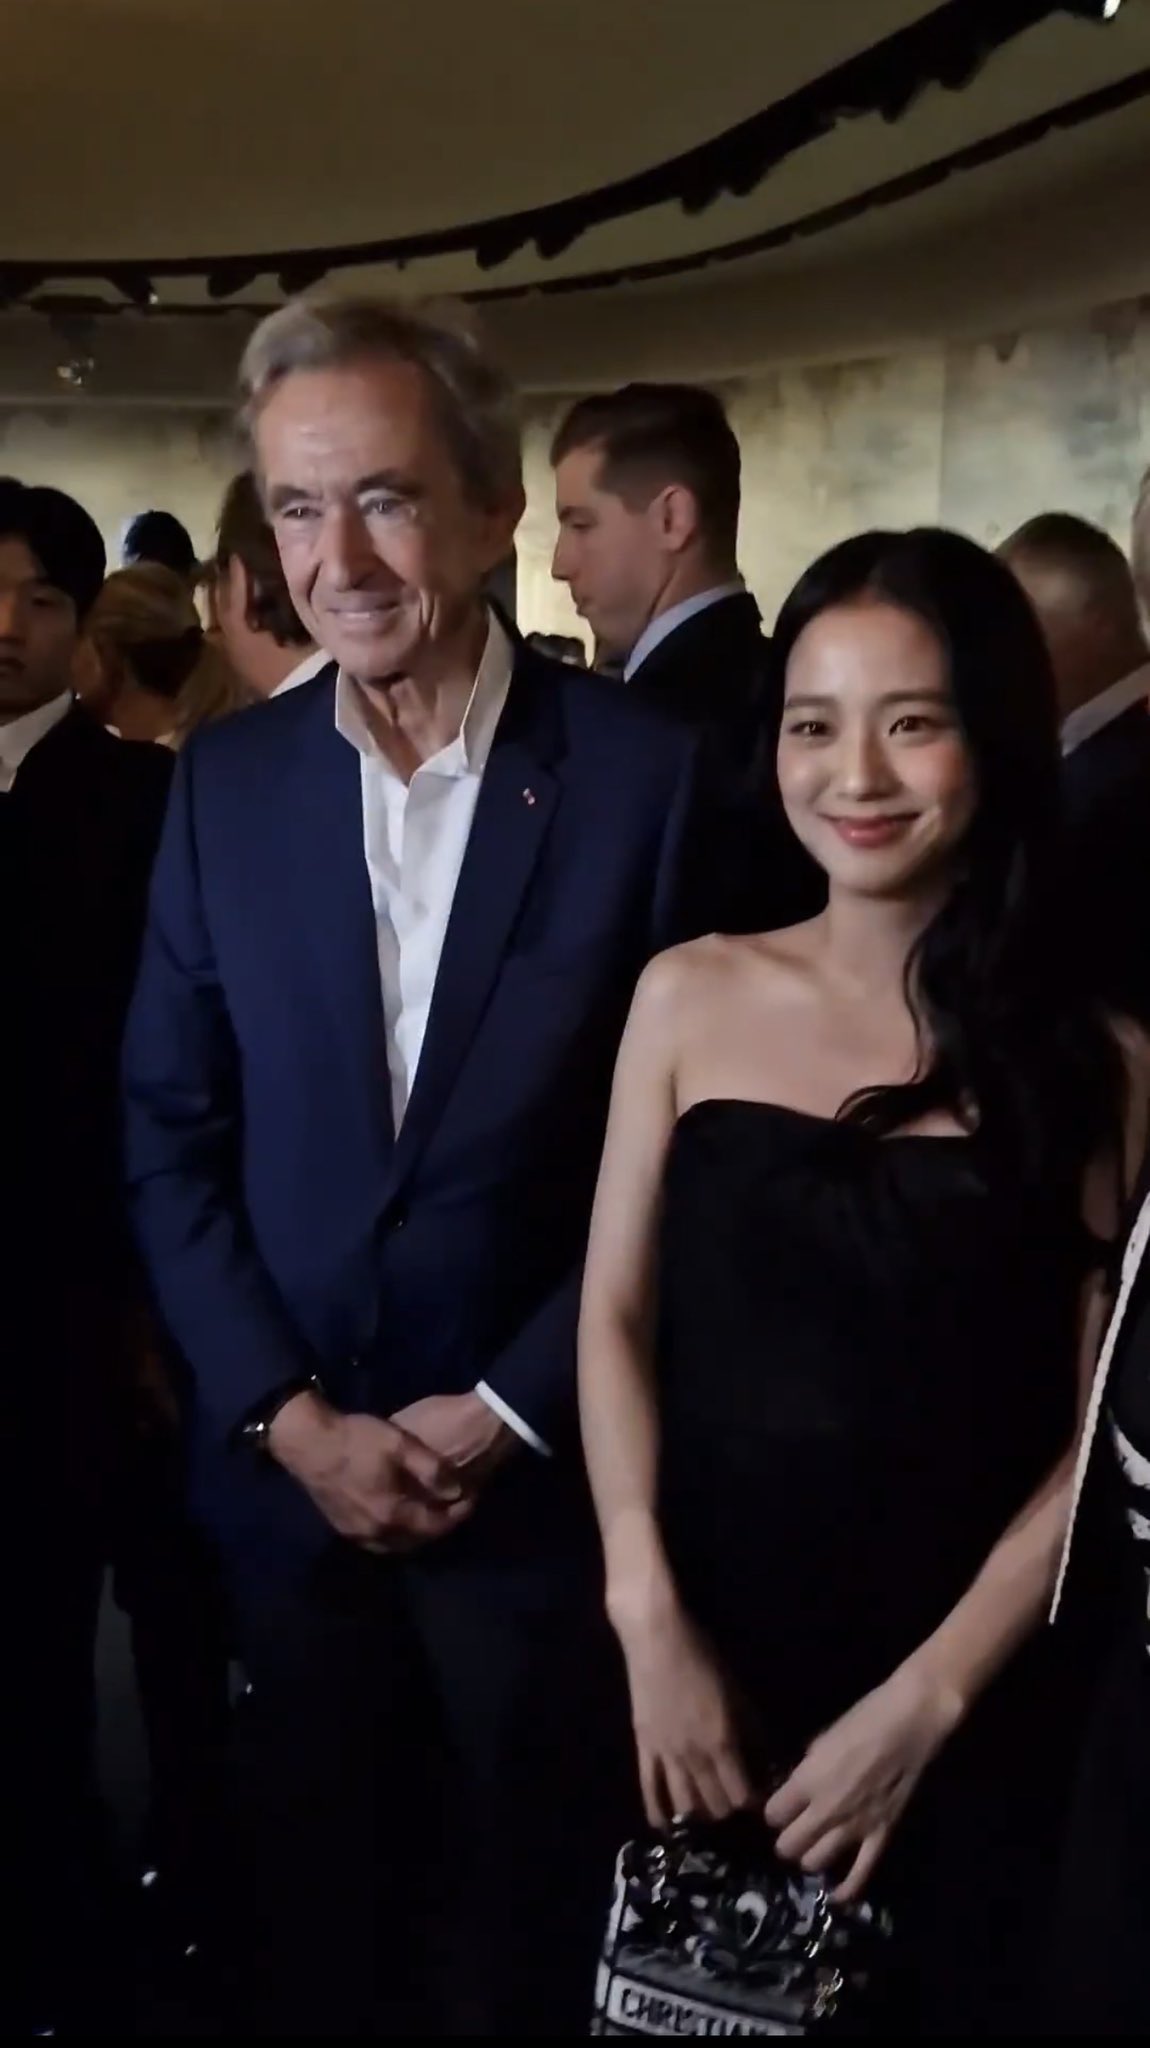 JISOO at the DIOR show with: • Bernard arnault (chairman & ceo of